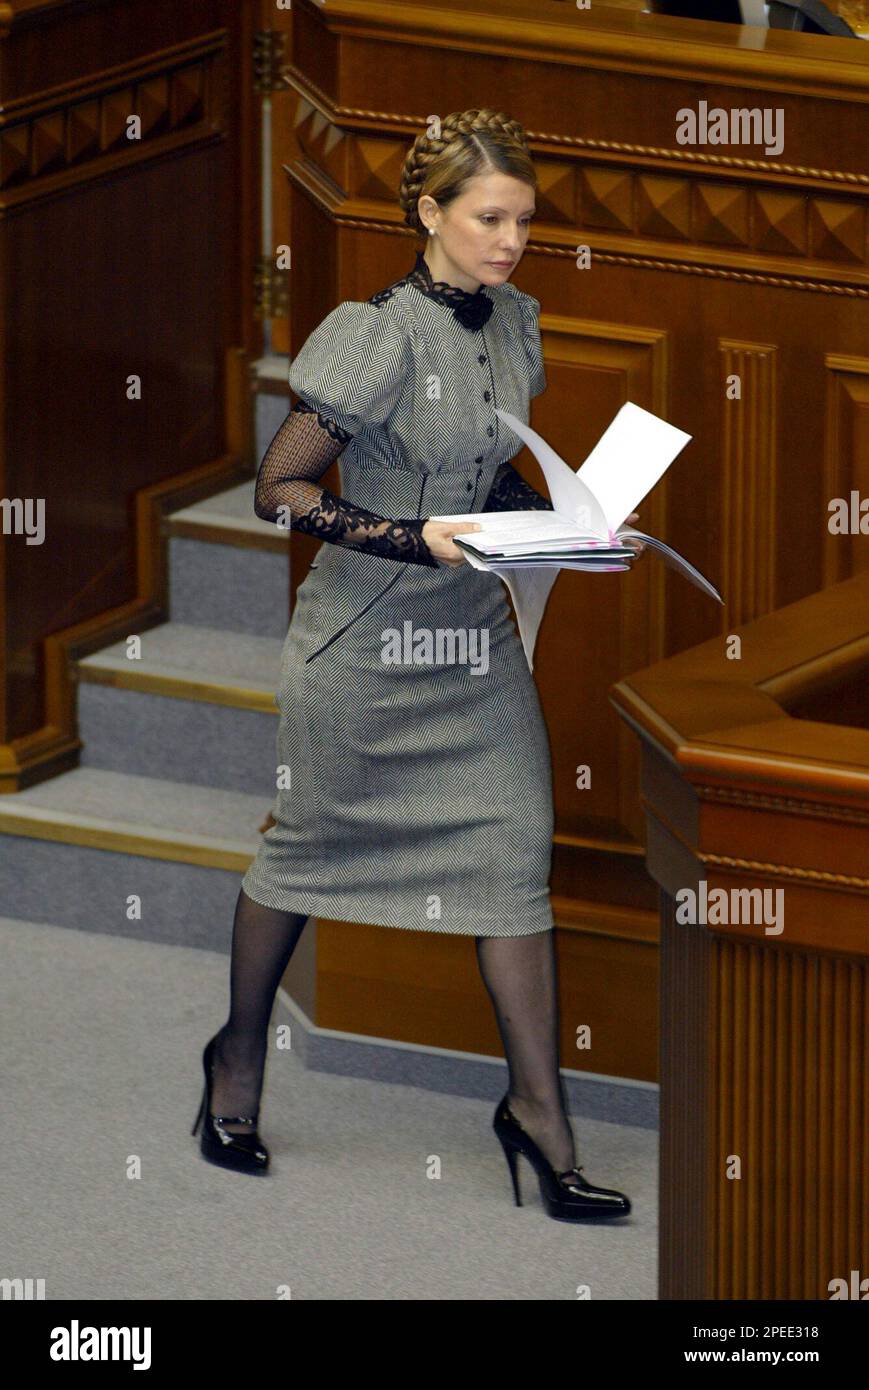 Acting Ukrainian Prime Minister Yulia Tymoshenko prepeares to read a programm of a new government in the Ukrainian parliament in Kiev, Friday, Feb. 4, 2005 . Tymoshenko's nomination for Ukraine's No. 2 job topped the agenda Friday as parliament reconvened, while behind-the-scenes dealmaking persisted for other influential posts in President Viktor Yushchenko's new government. ( AP Photo/ Sergei Grits) Stock Photo